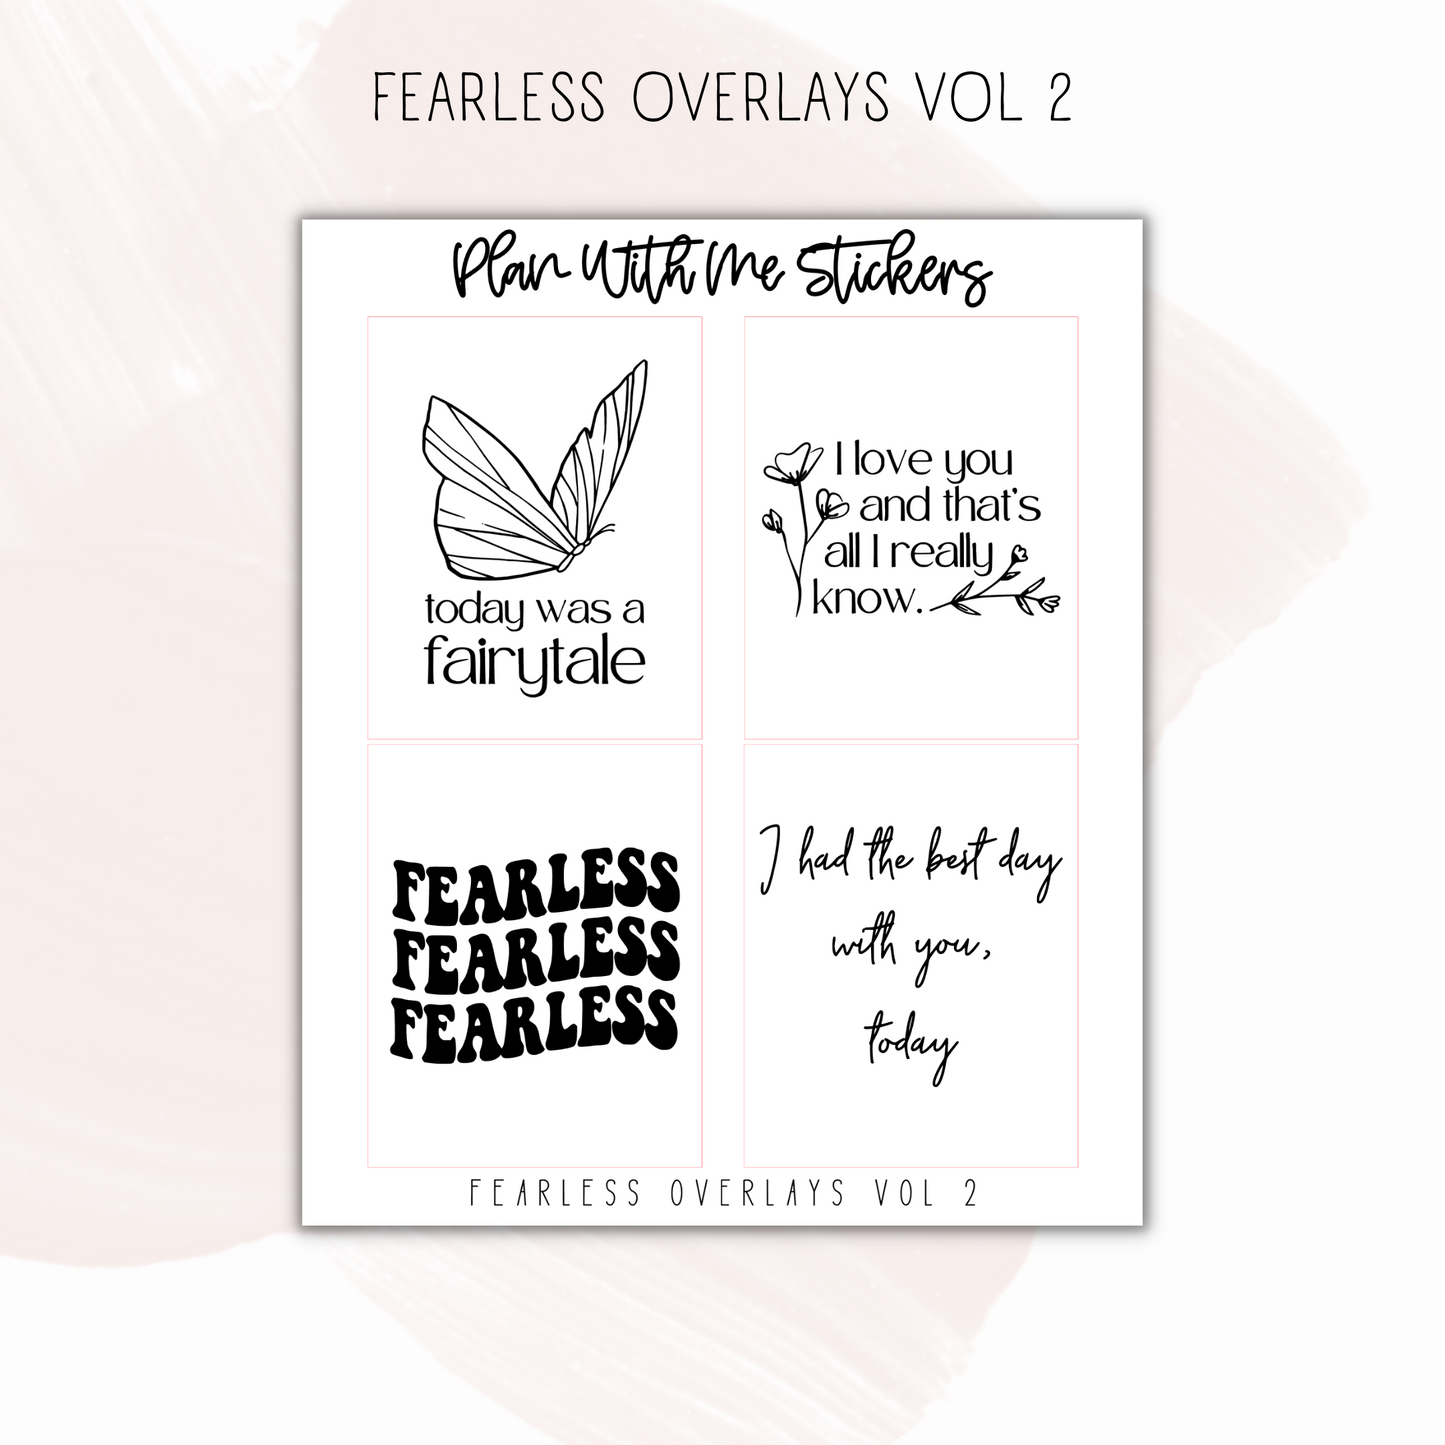 Fearless Overlays Vol 2